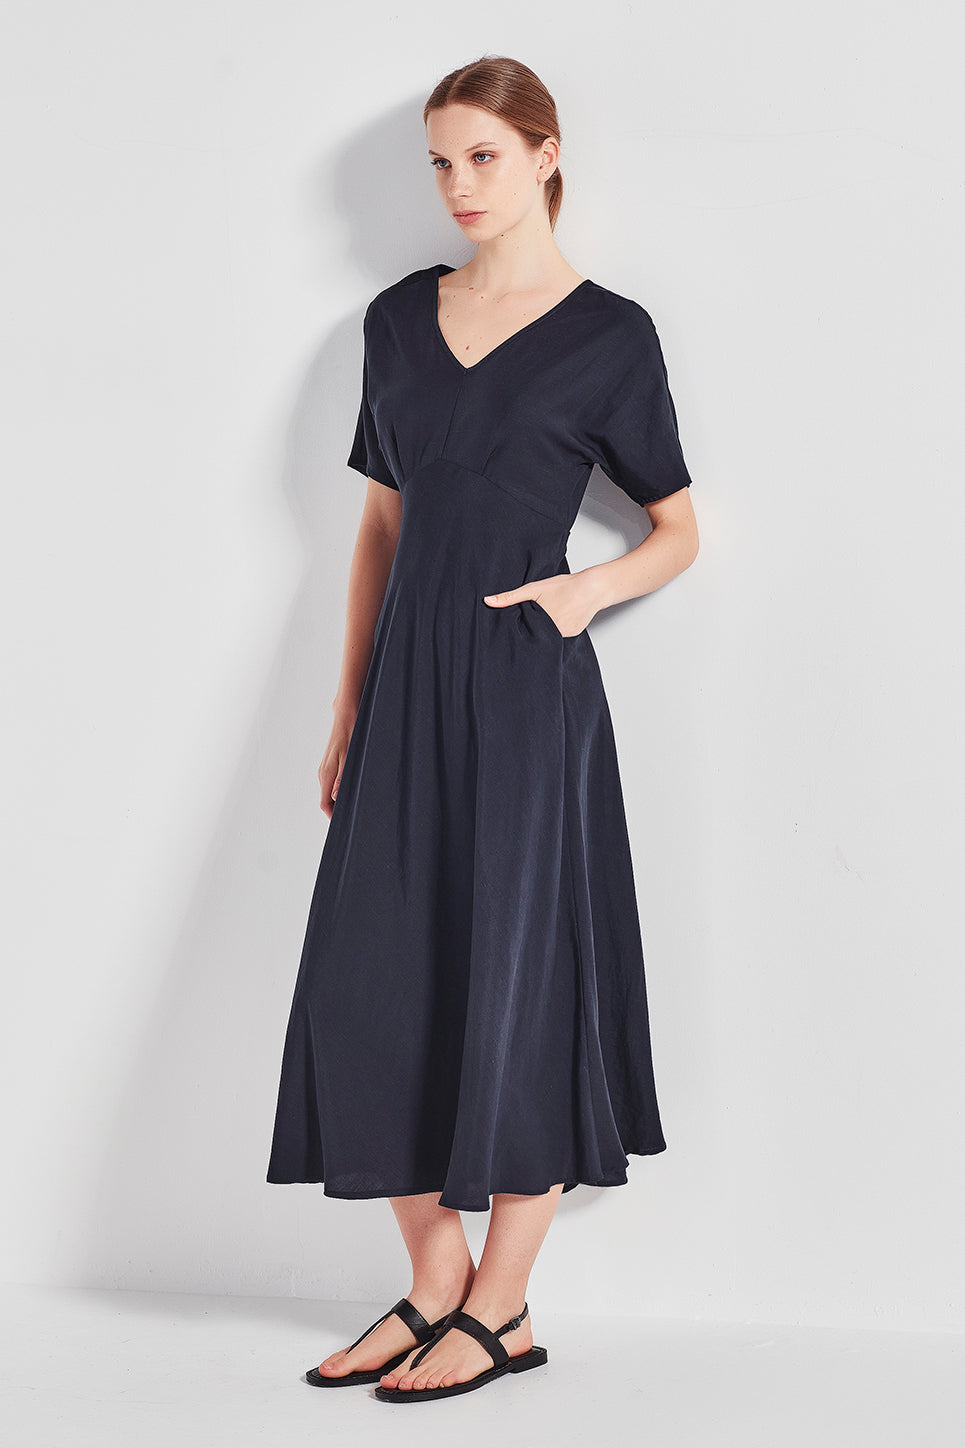 The Evelyn 2-Way Dress in Navy